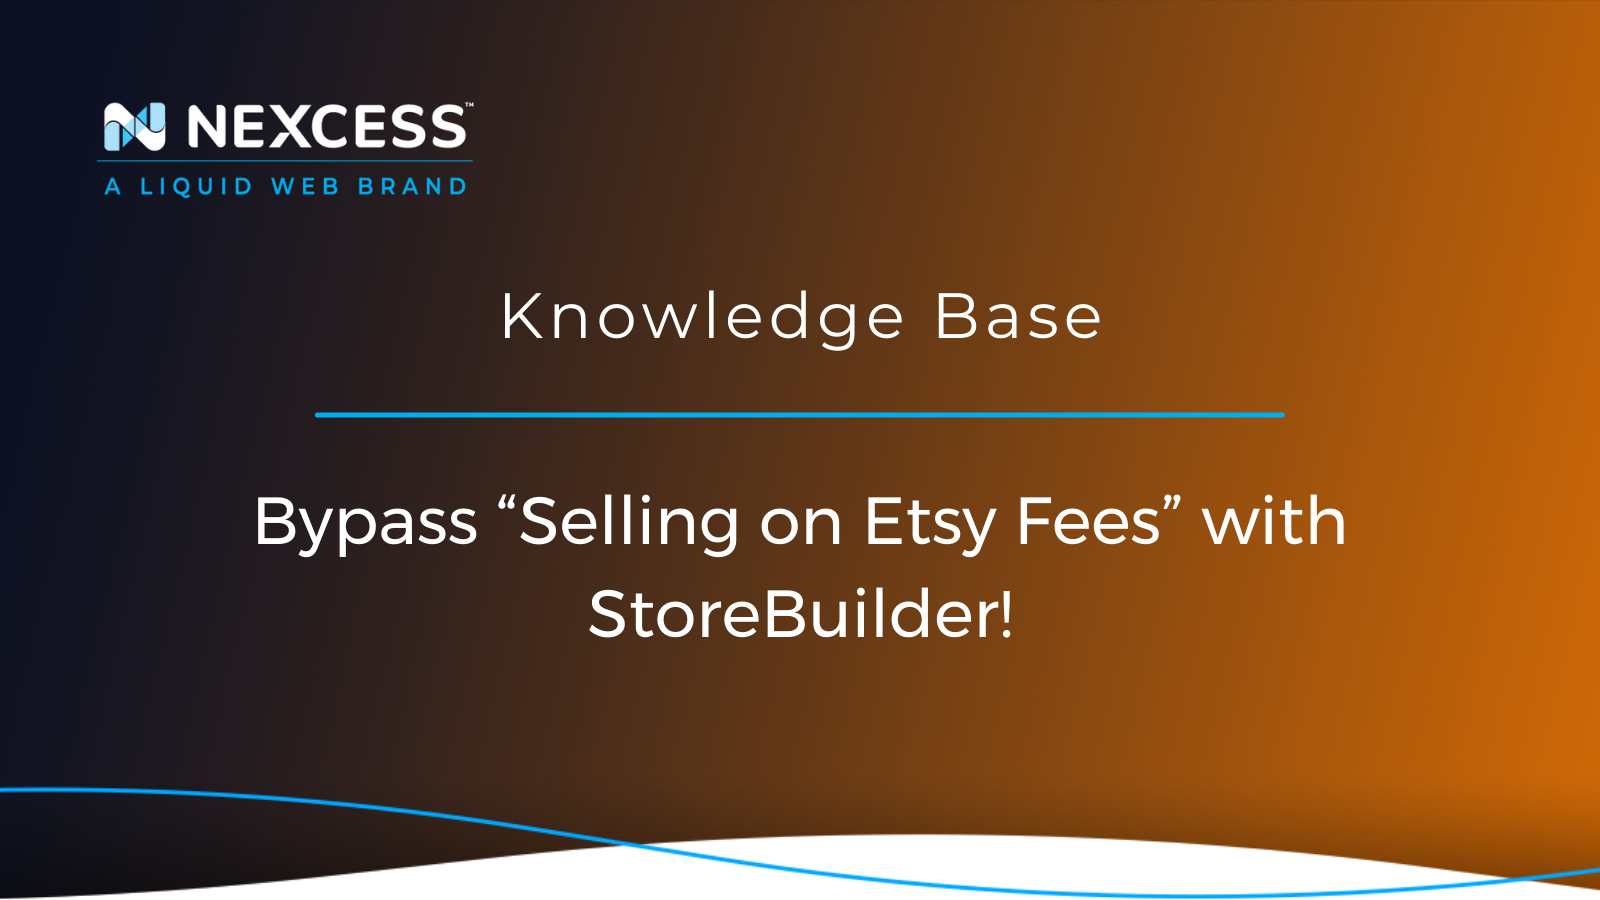 Bypass “Selling on Etsy Fees” with StoreBuilder!